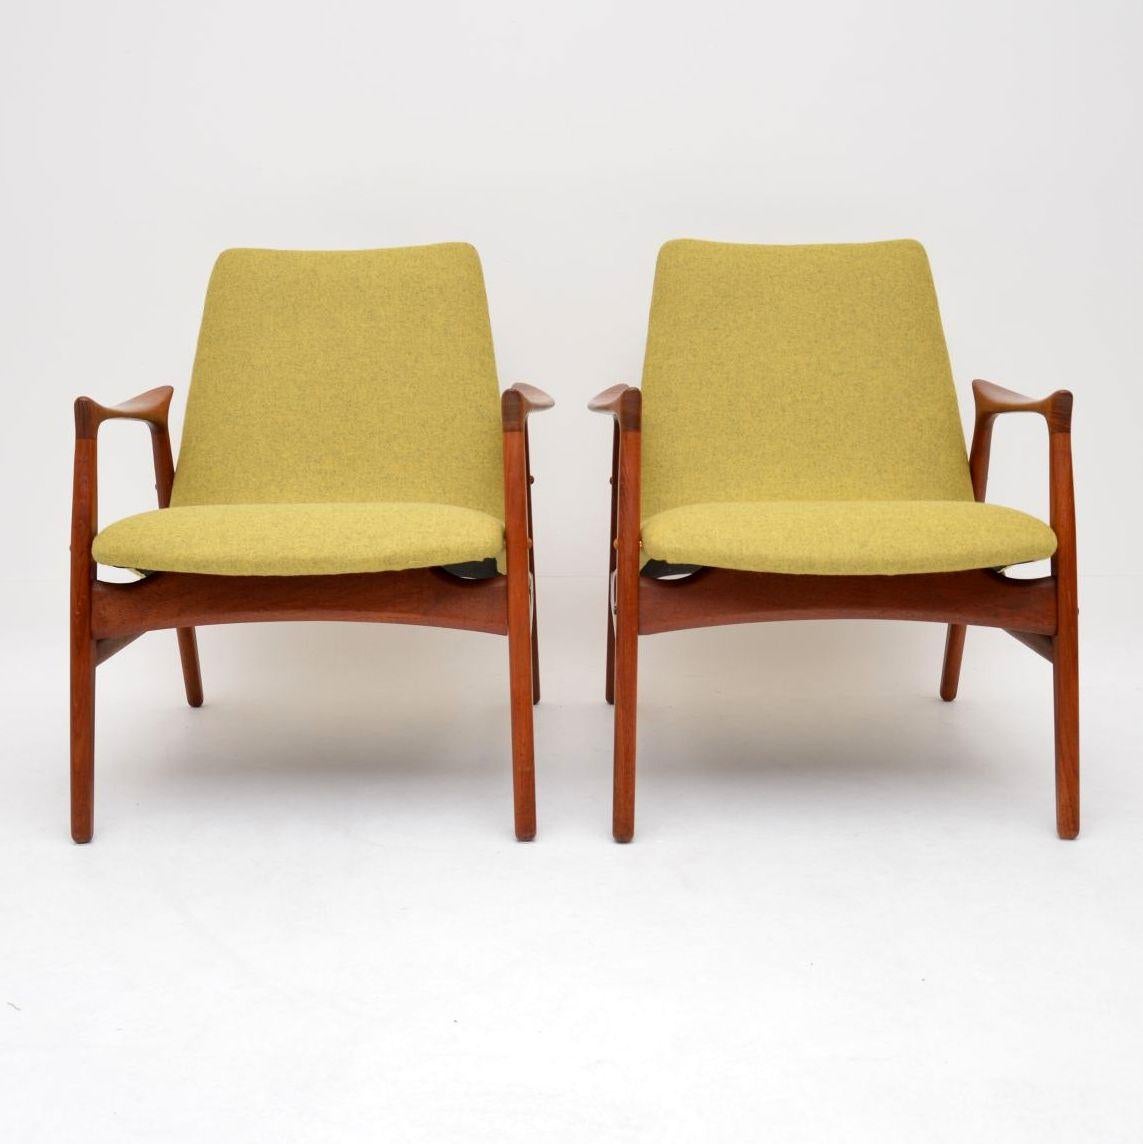 An absolutely stunning and extremely rare pair of Danish teak armchairs, these were designed in 1958 by Arne Hovmand-Olsen, they were made by Mogens Kold. These are extremely comfortable as well as stylish, they are in amazing condition for their